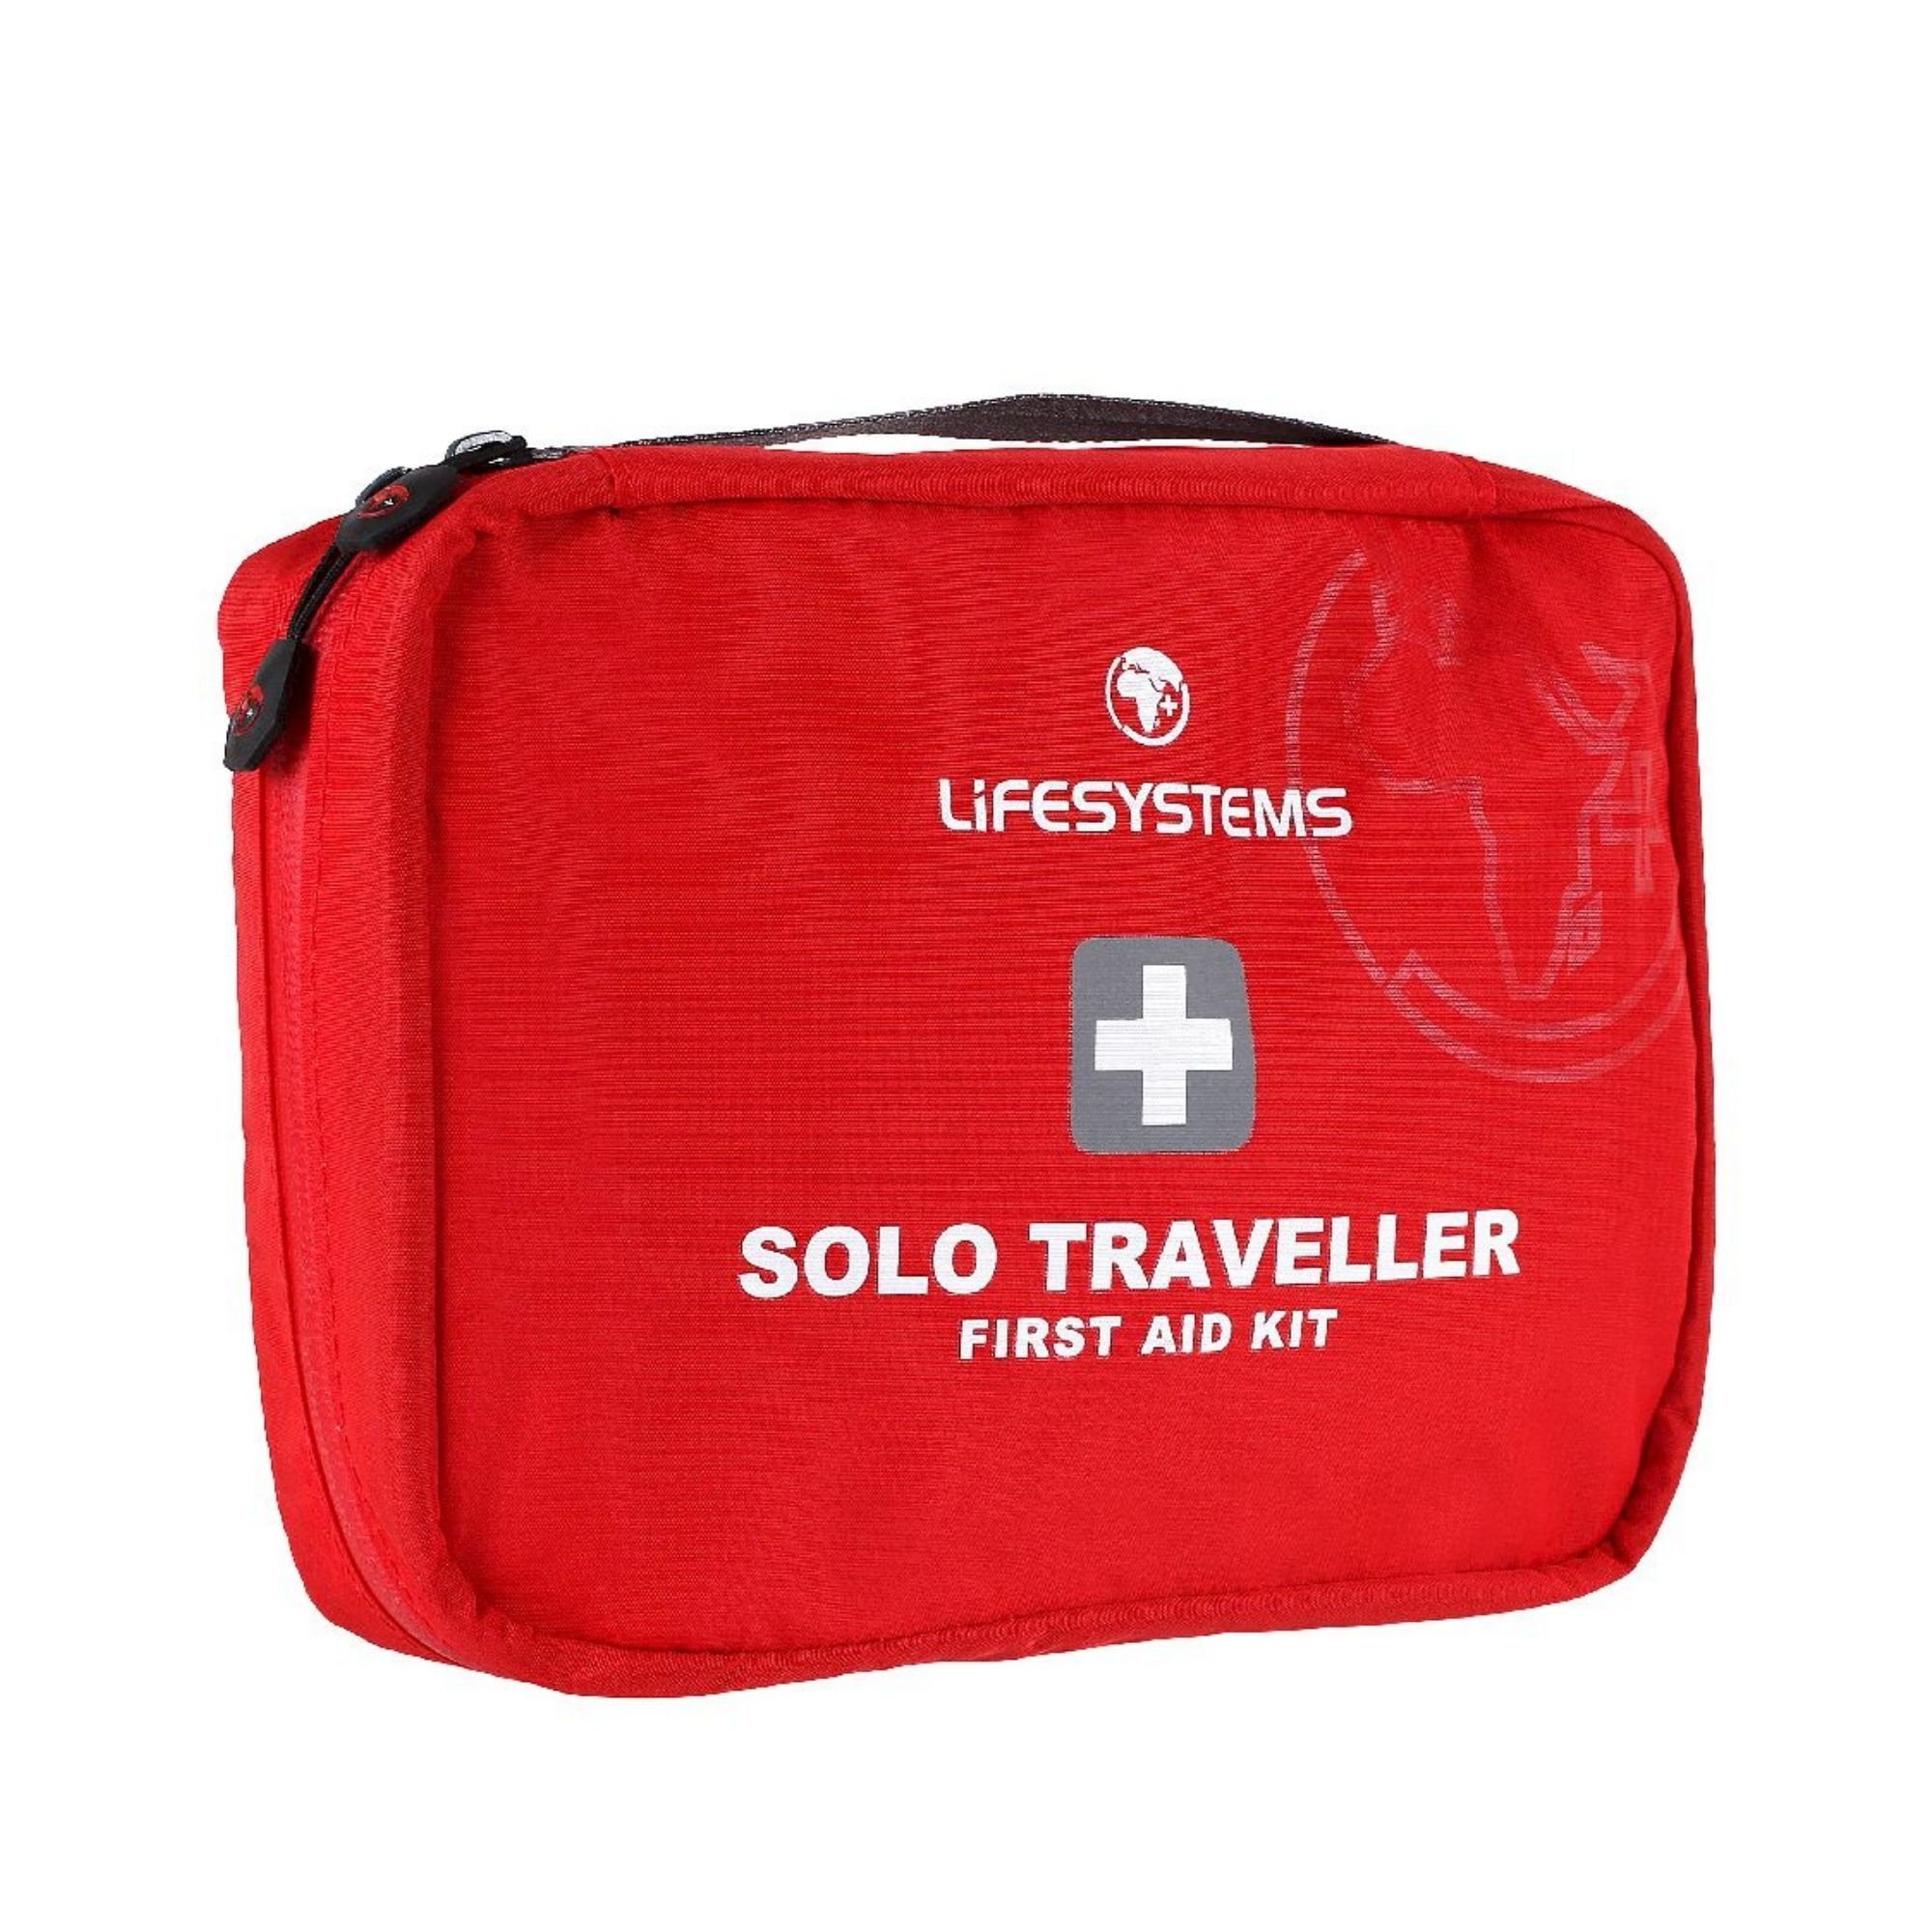 LittleLife Solo Traveller Travel First Aid Kits - First aid kit